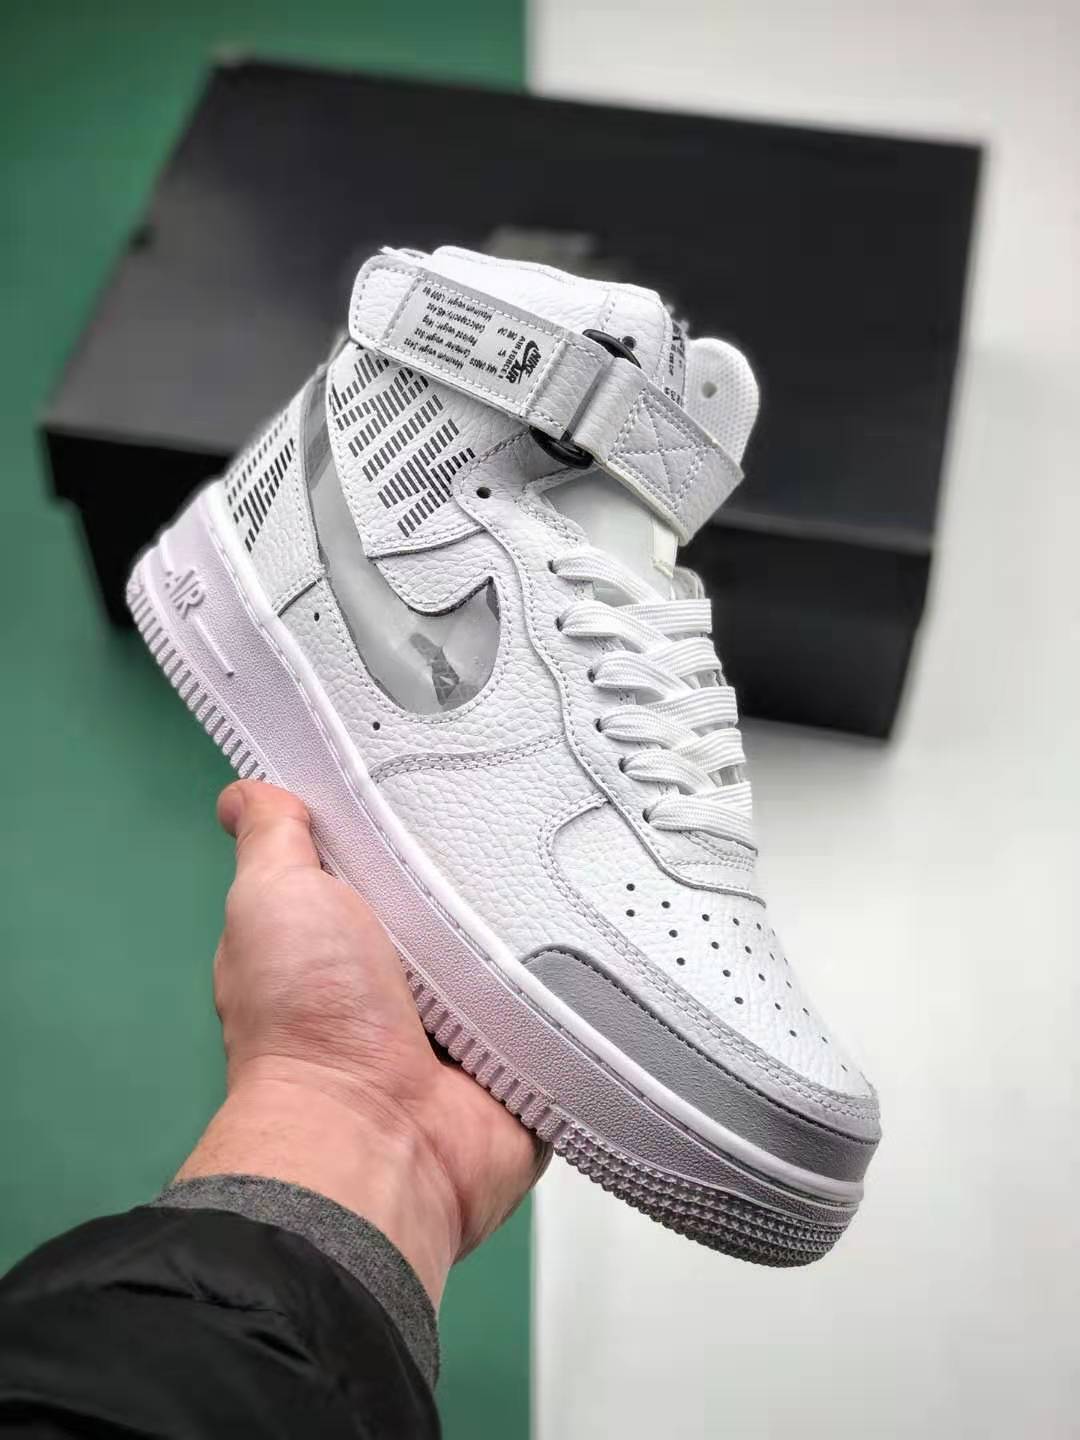 Nike Air Force 1 High Under Construction White CQ0449-100 - Stylish and Innovative Sneakers